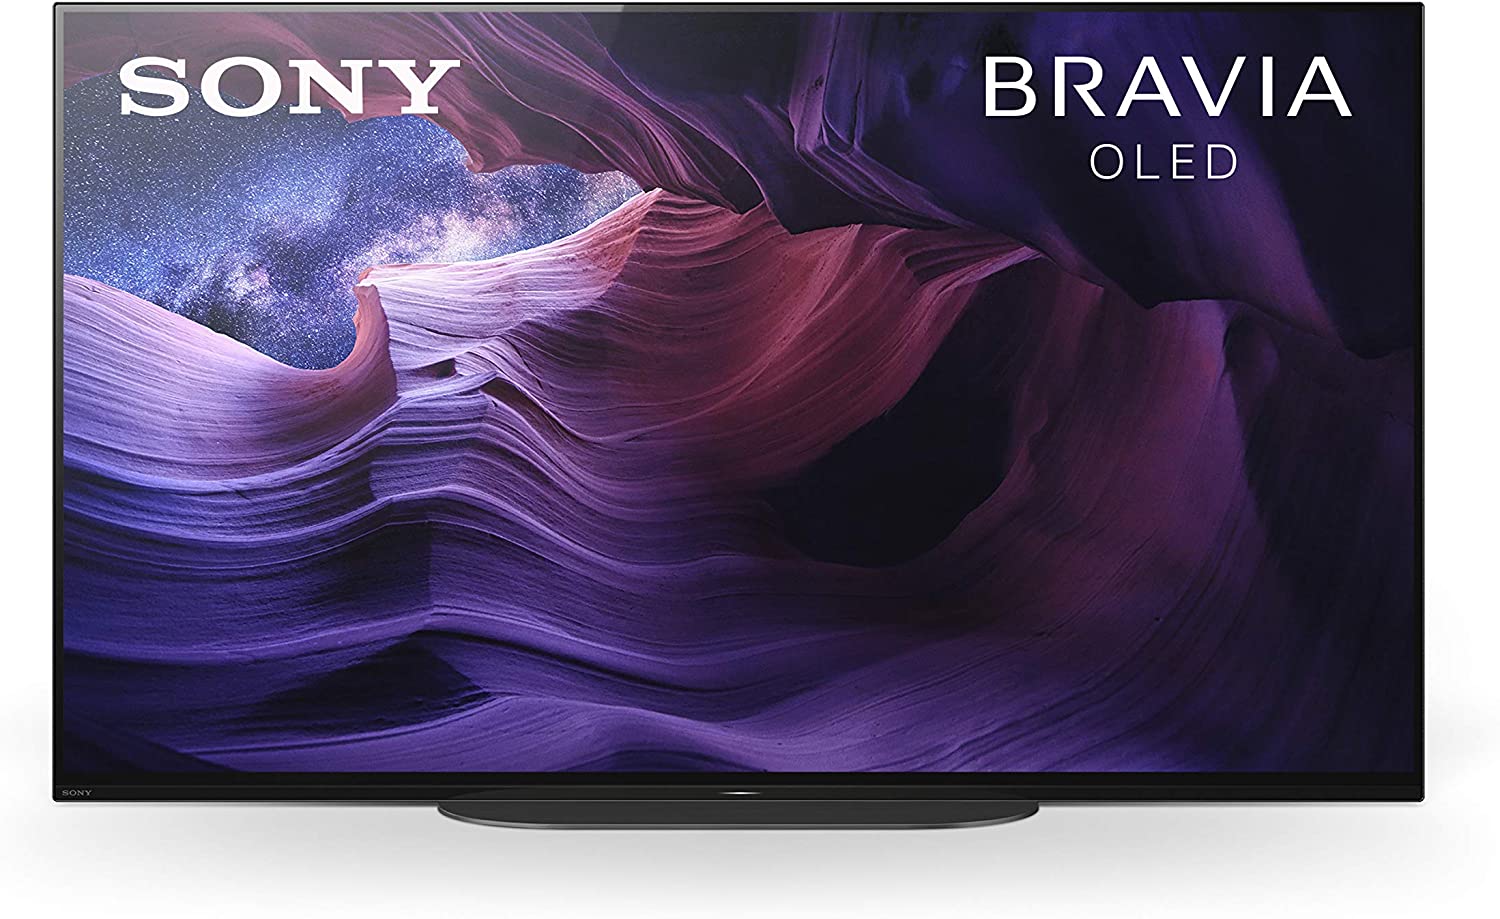 Sony 48-inch Master Series A9S BRAVIA OLED 4K HDR Smart Android TV with Google Assistant, XBR48A9S